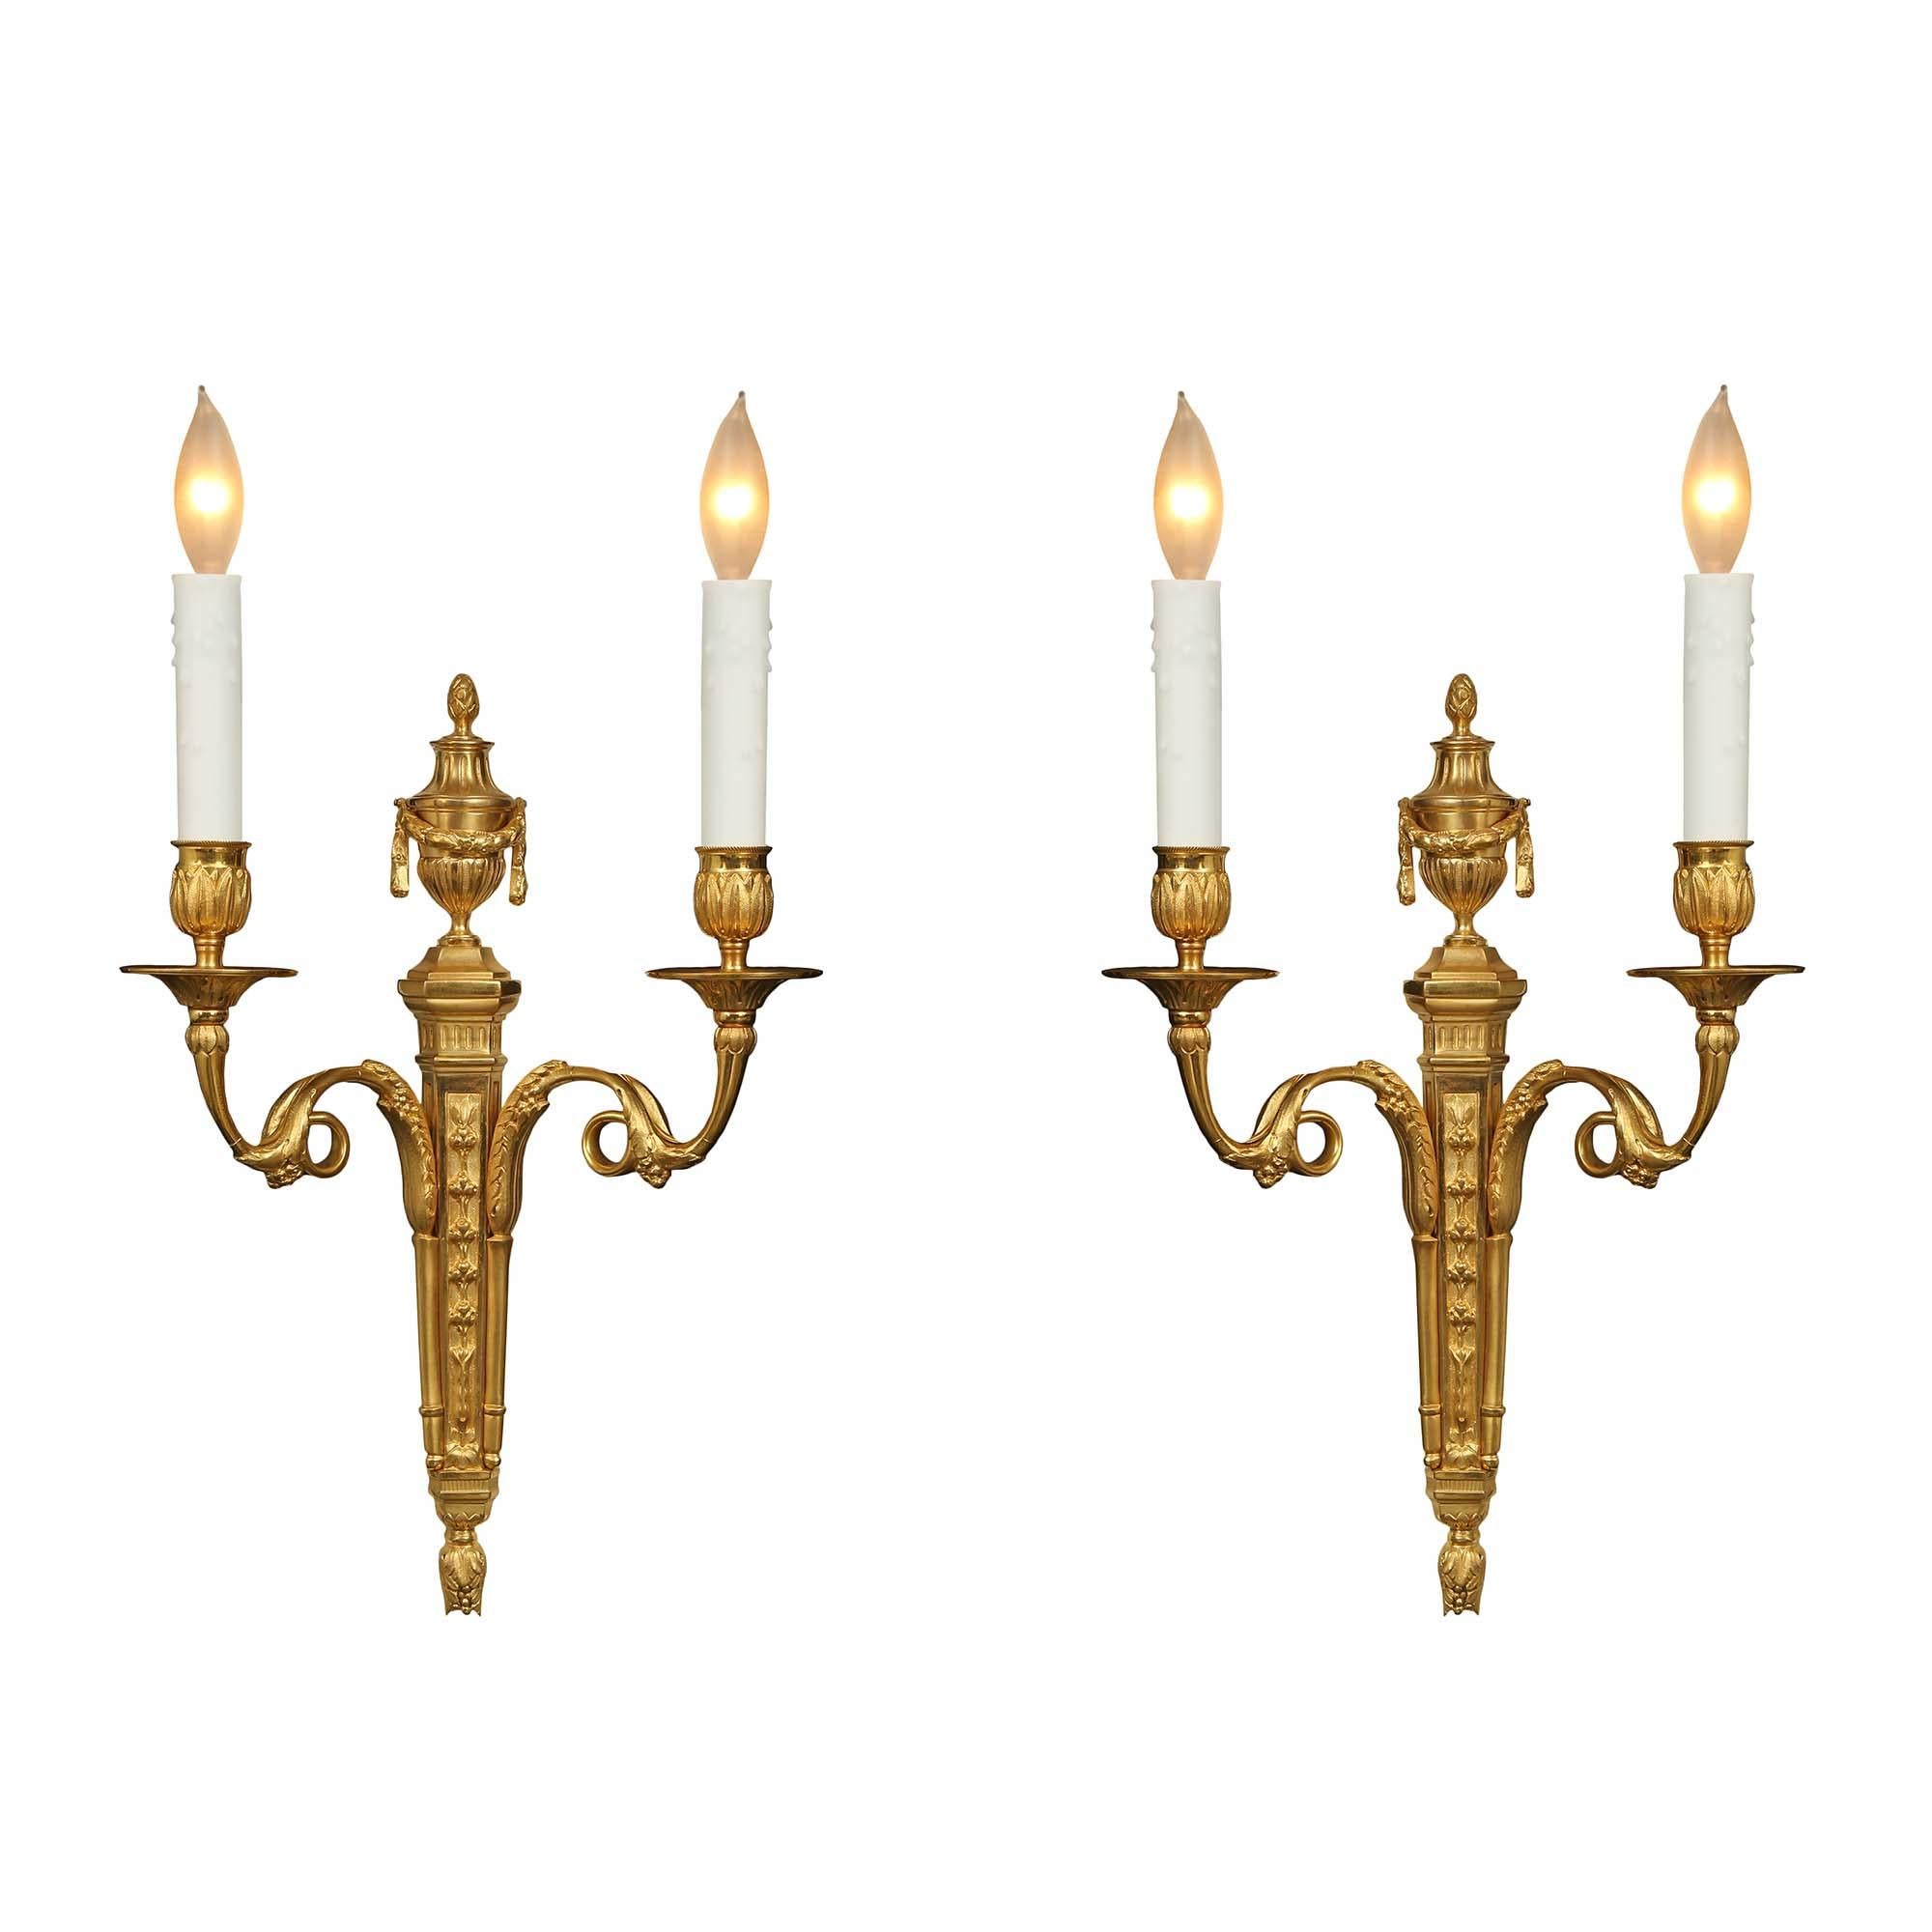 An elegant and high quality pair of French mid 19th century two arm Louis XVI st. ormolu sconces. The pair with a tapered backplate designed with fruits has two 'S' scrolled arms with a loop. The richly chased arms end with acanthus leaf decorated